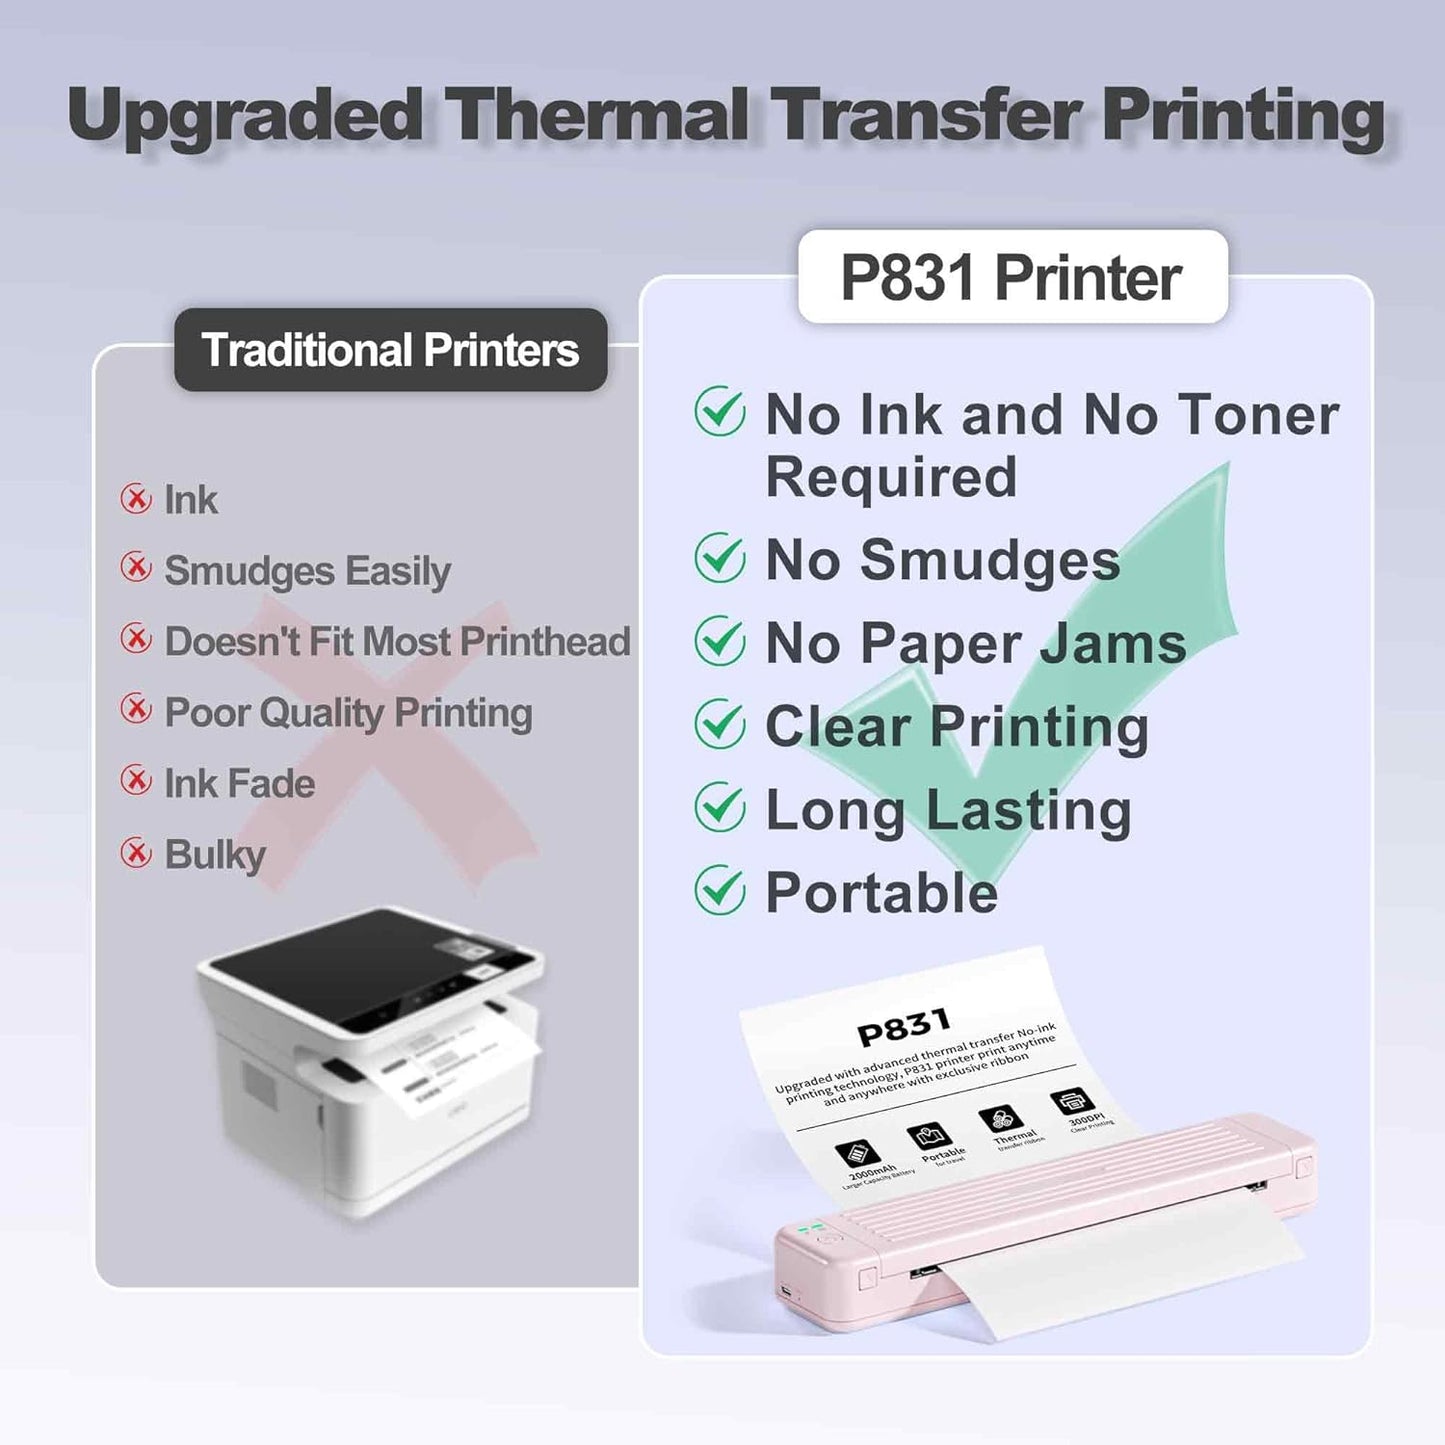 Itari Portable Printers Wireless for Travel, Inkless Thermal Transfer Printer Support Copy Paper 8.5 x 11 White & A4 Printer Paper, 3